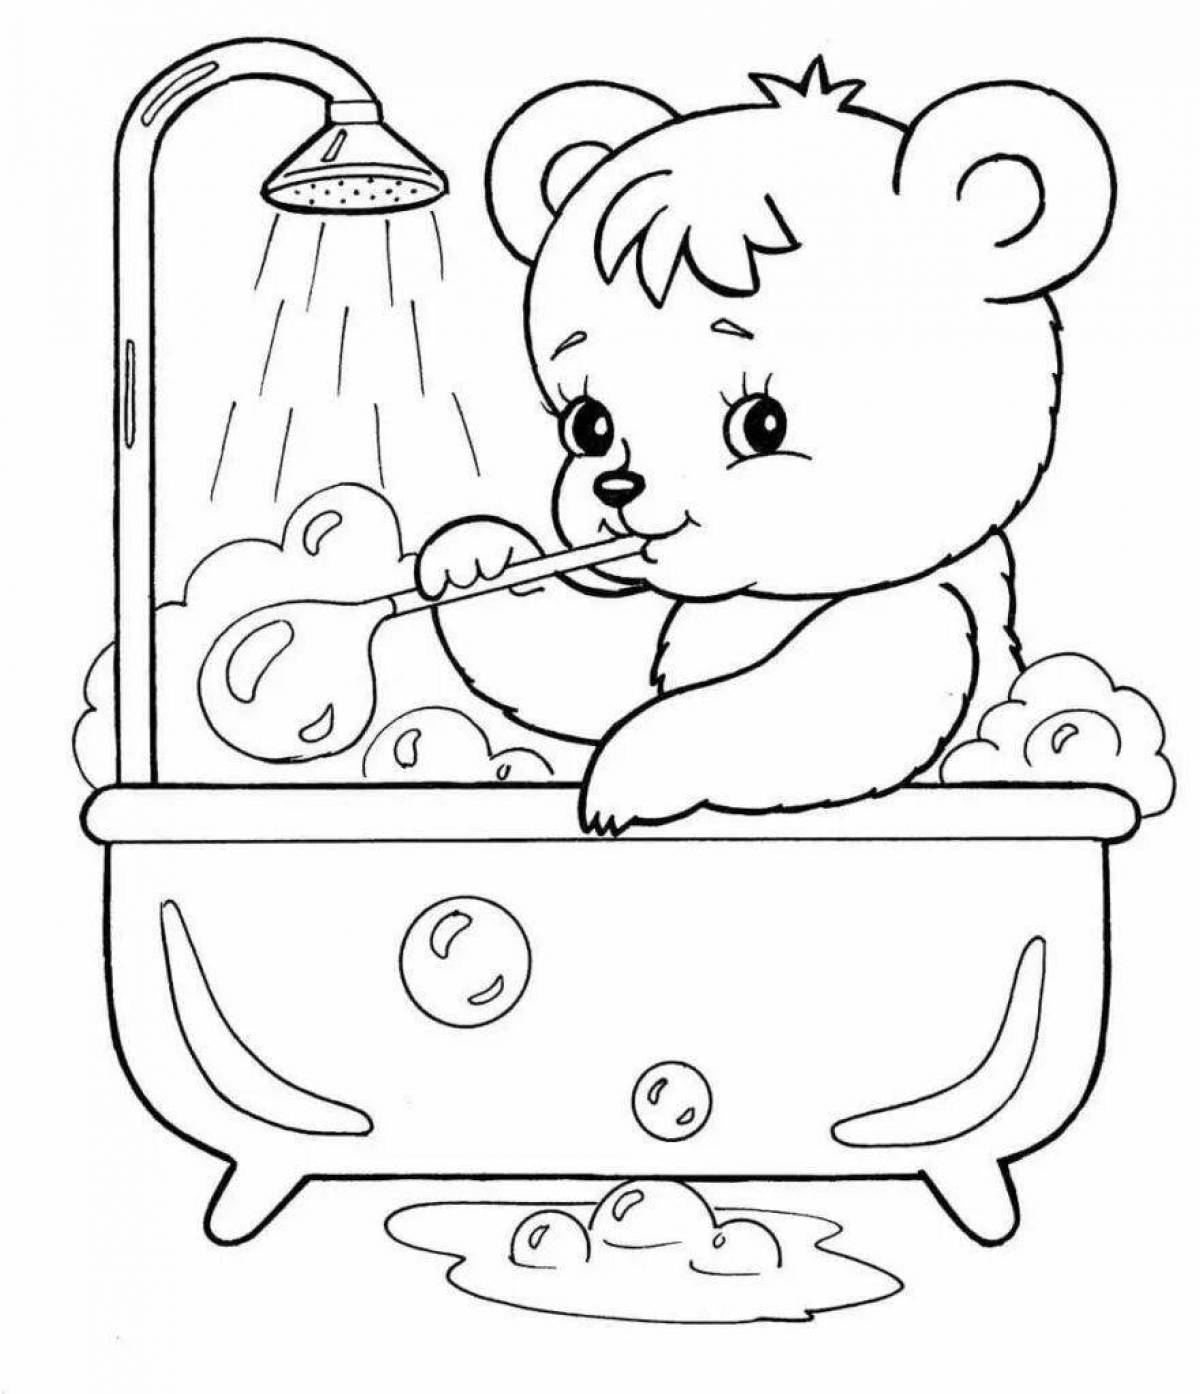 Color-frenzy coloring page in kindergarten 4-5 years old